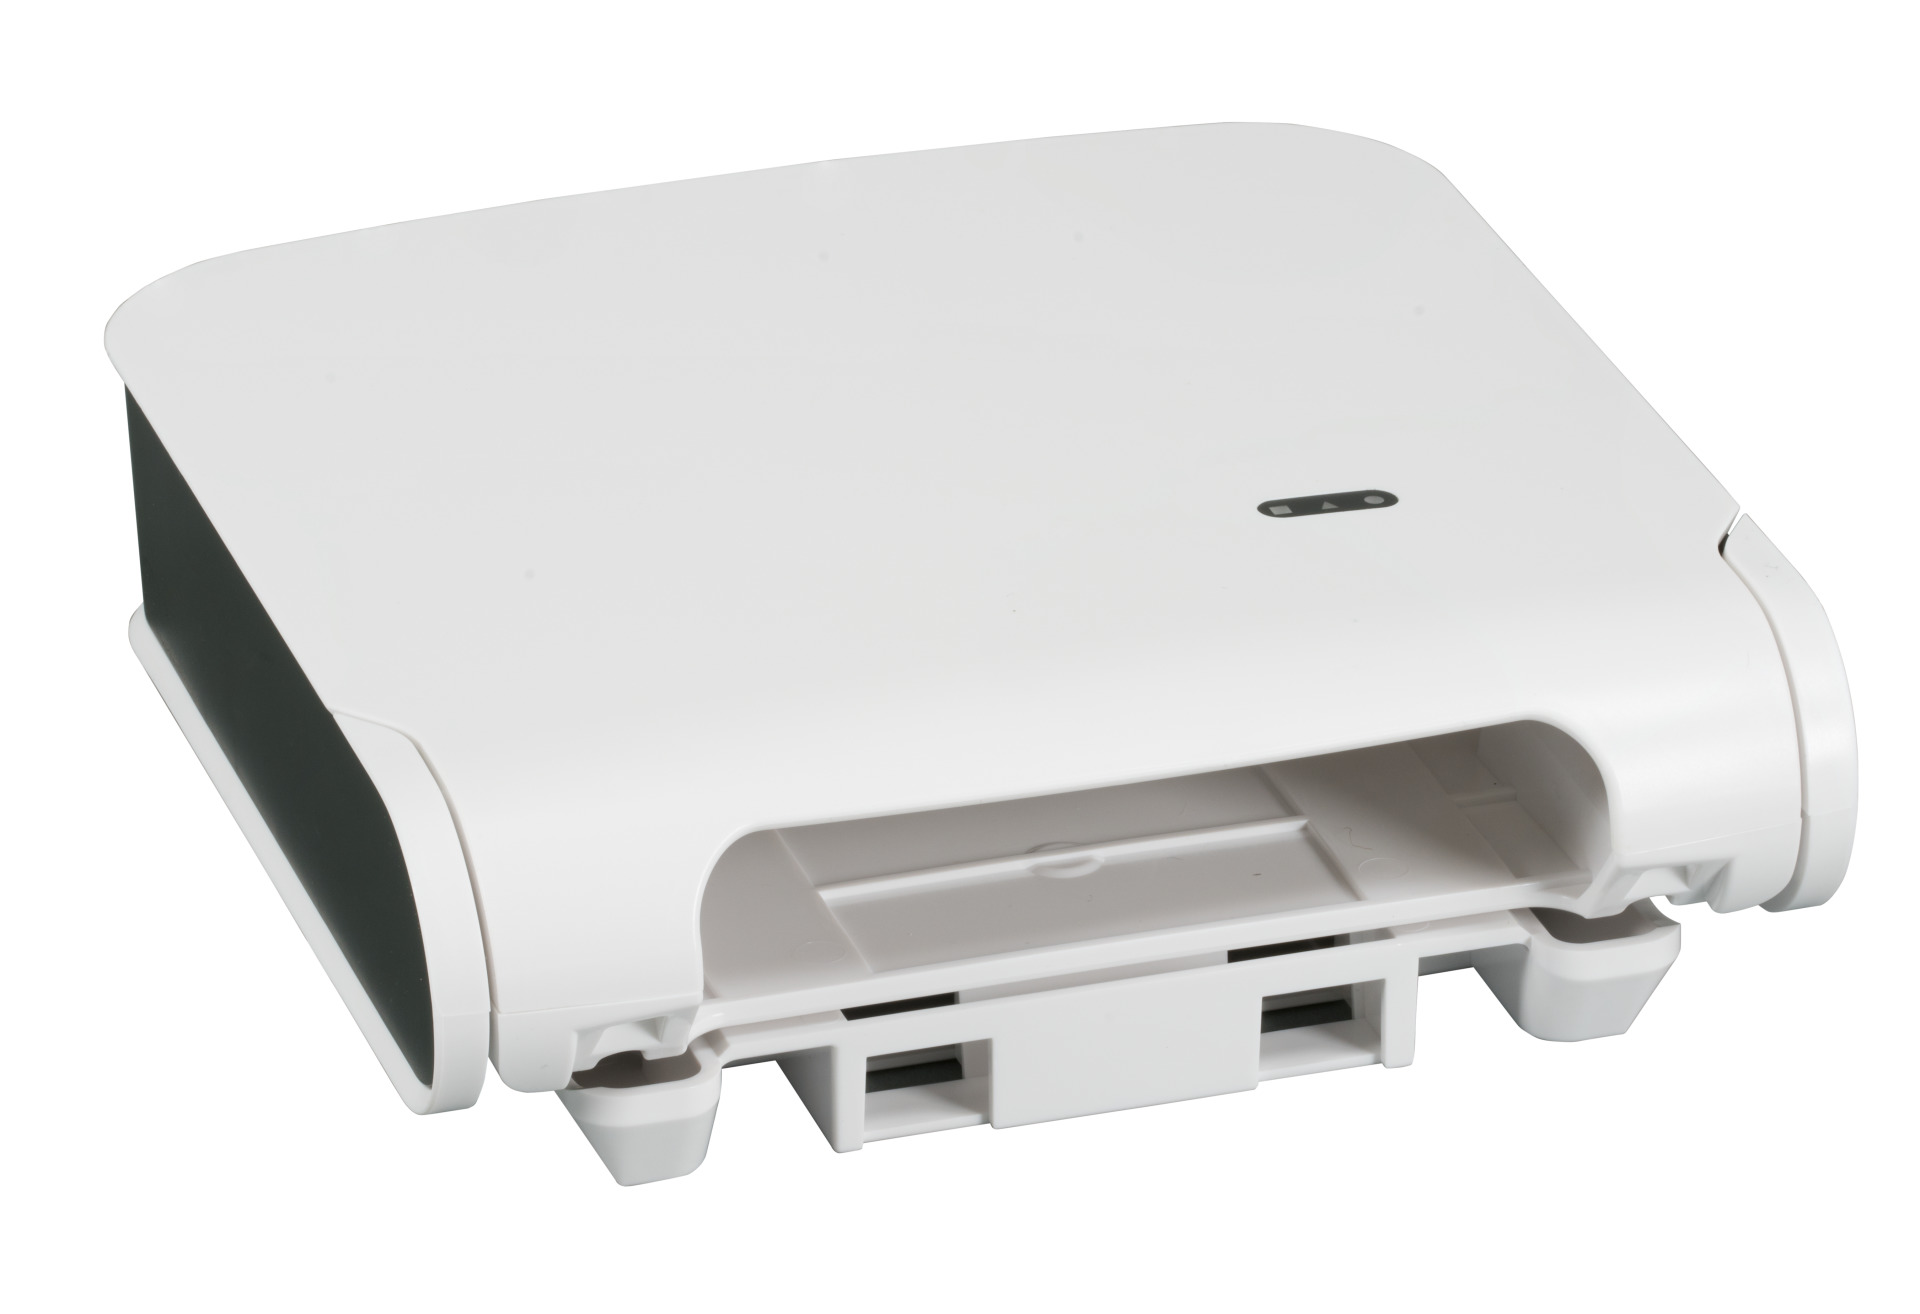 Wall mounting for XON1300 & APL with integrated fiber management